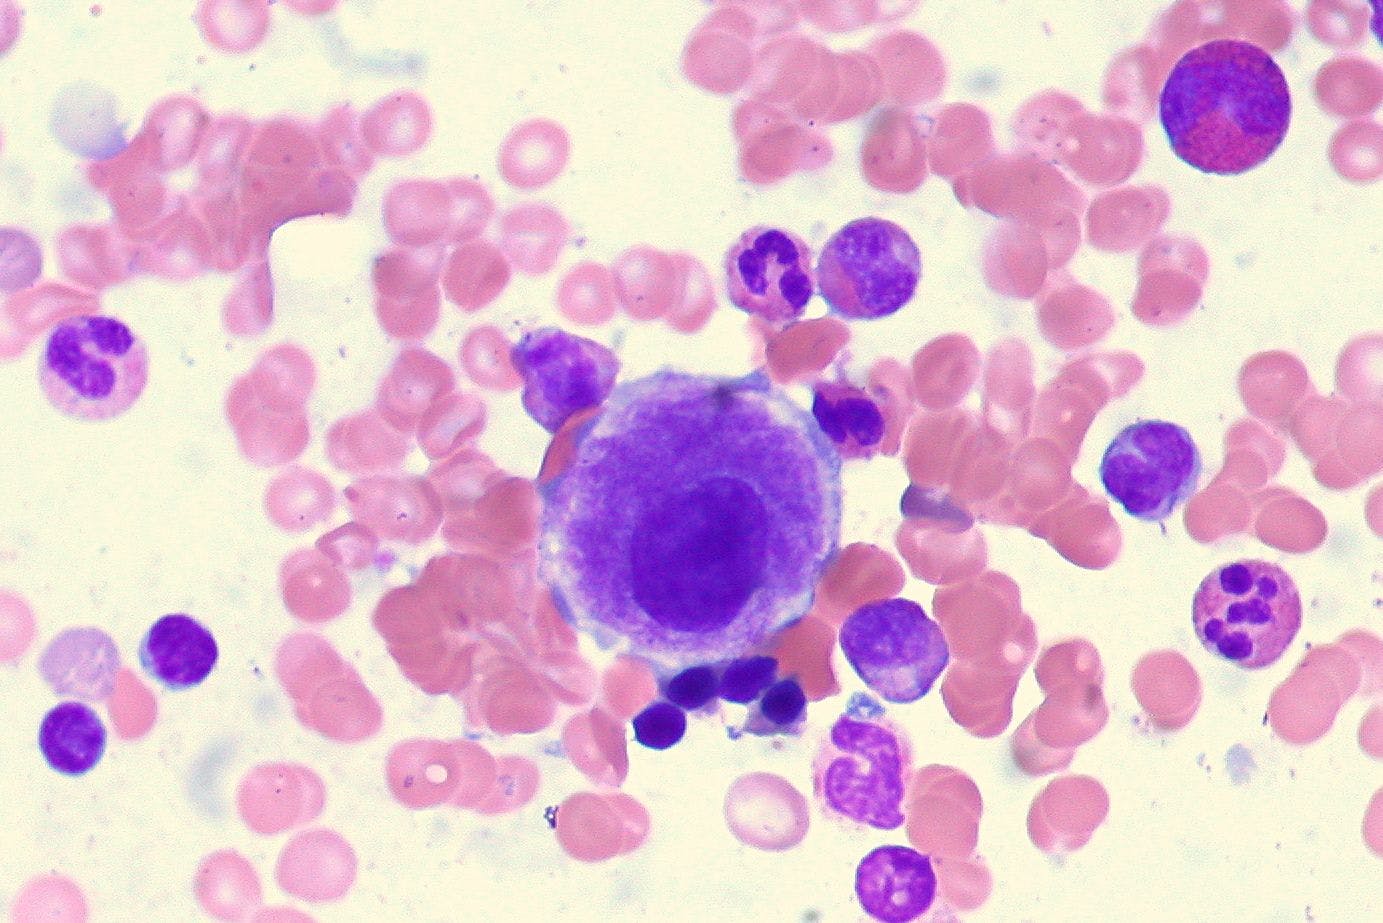 "With further advances in therapeutic approaches for lymphoid neoplasms, future studies with additional follow-up, newer therapies, and detailed clinical data will be important for assessing [therapy-related] MDS/AML risks and informing evolving risk/benefit assessments for specific treatment regimens," according to the study authors.